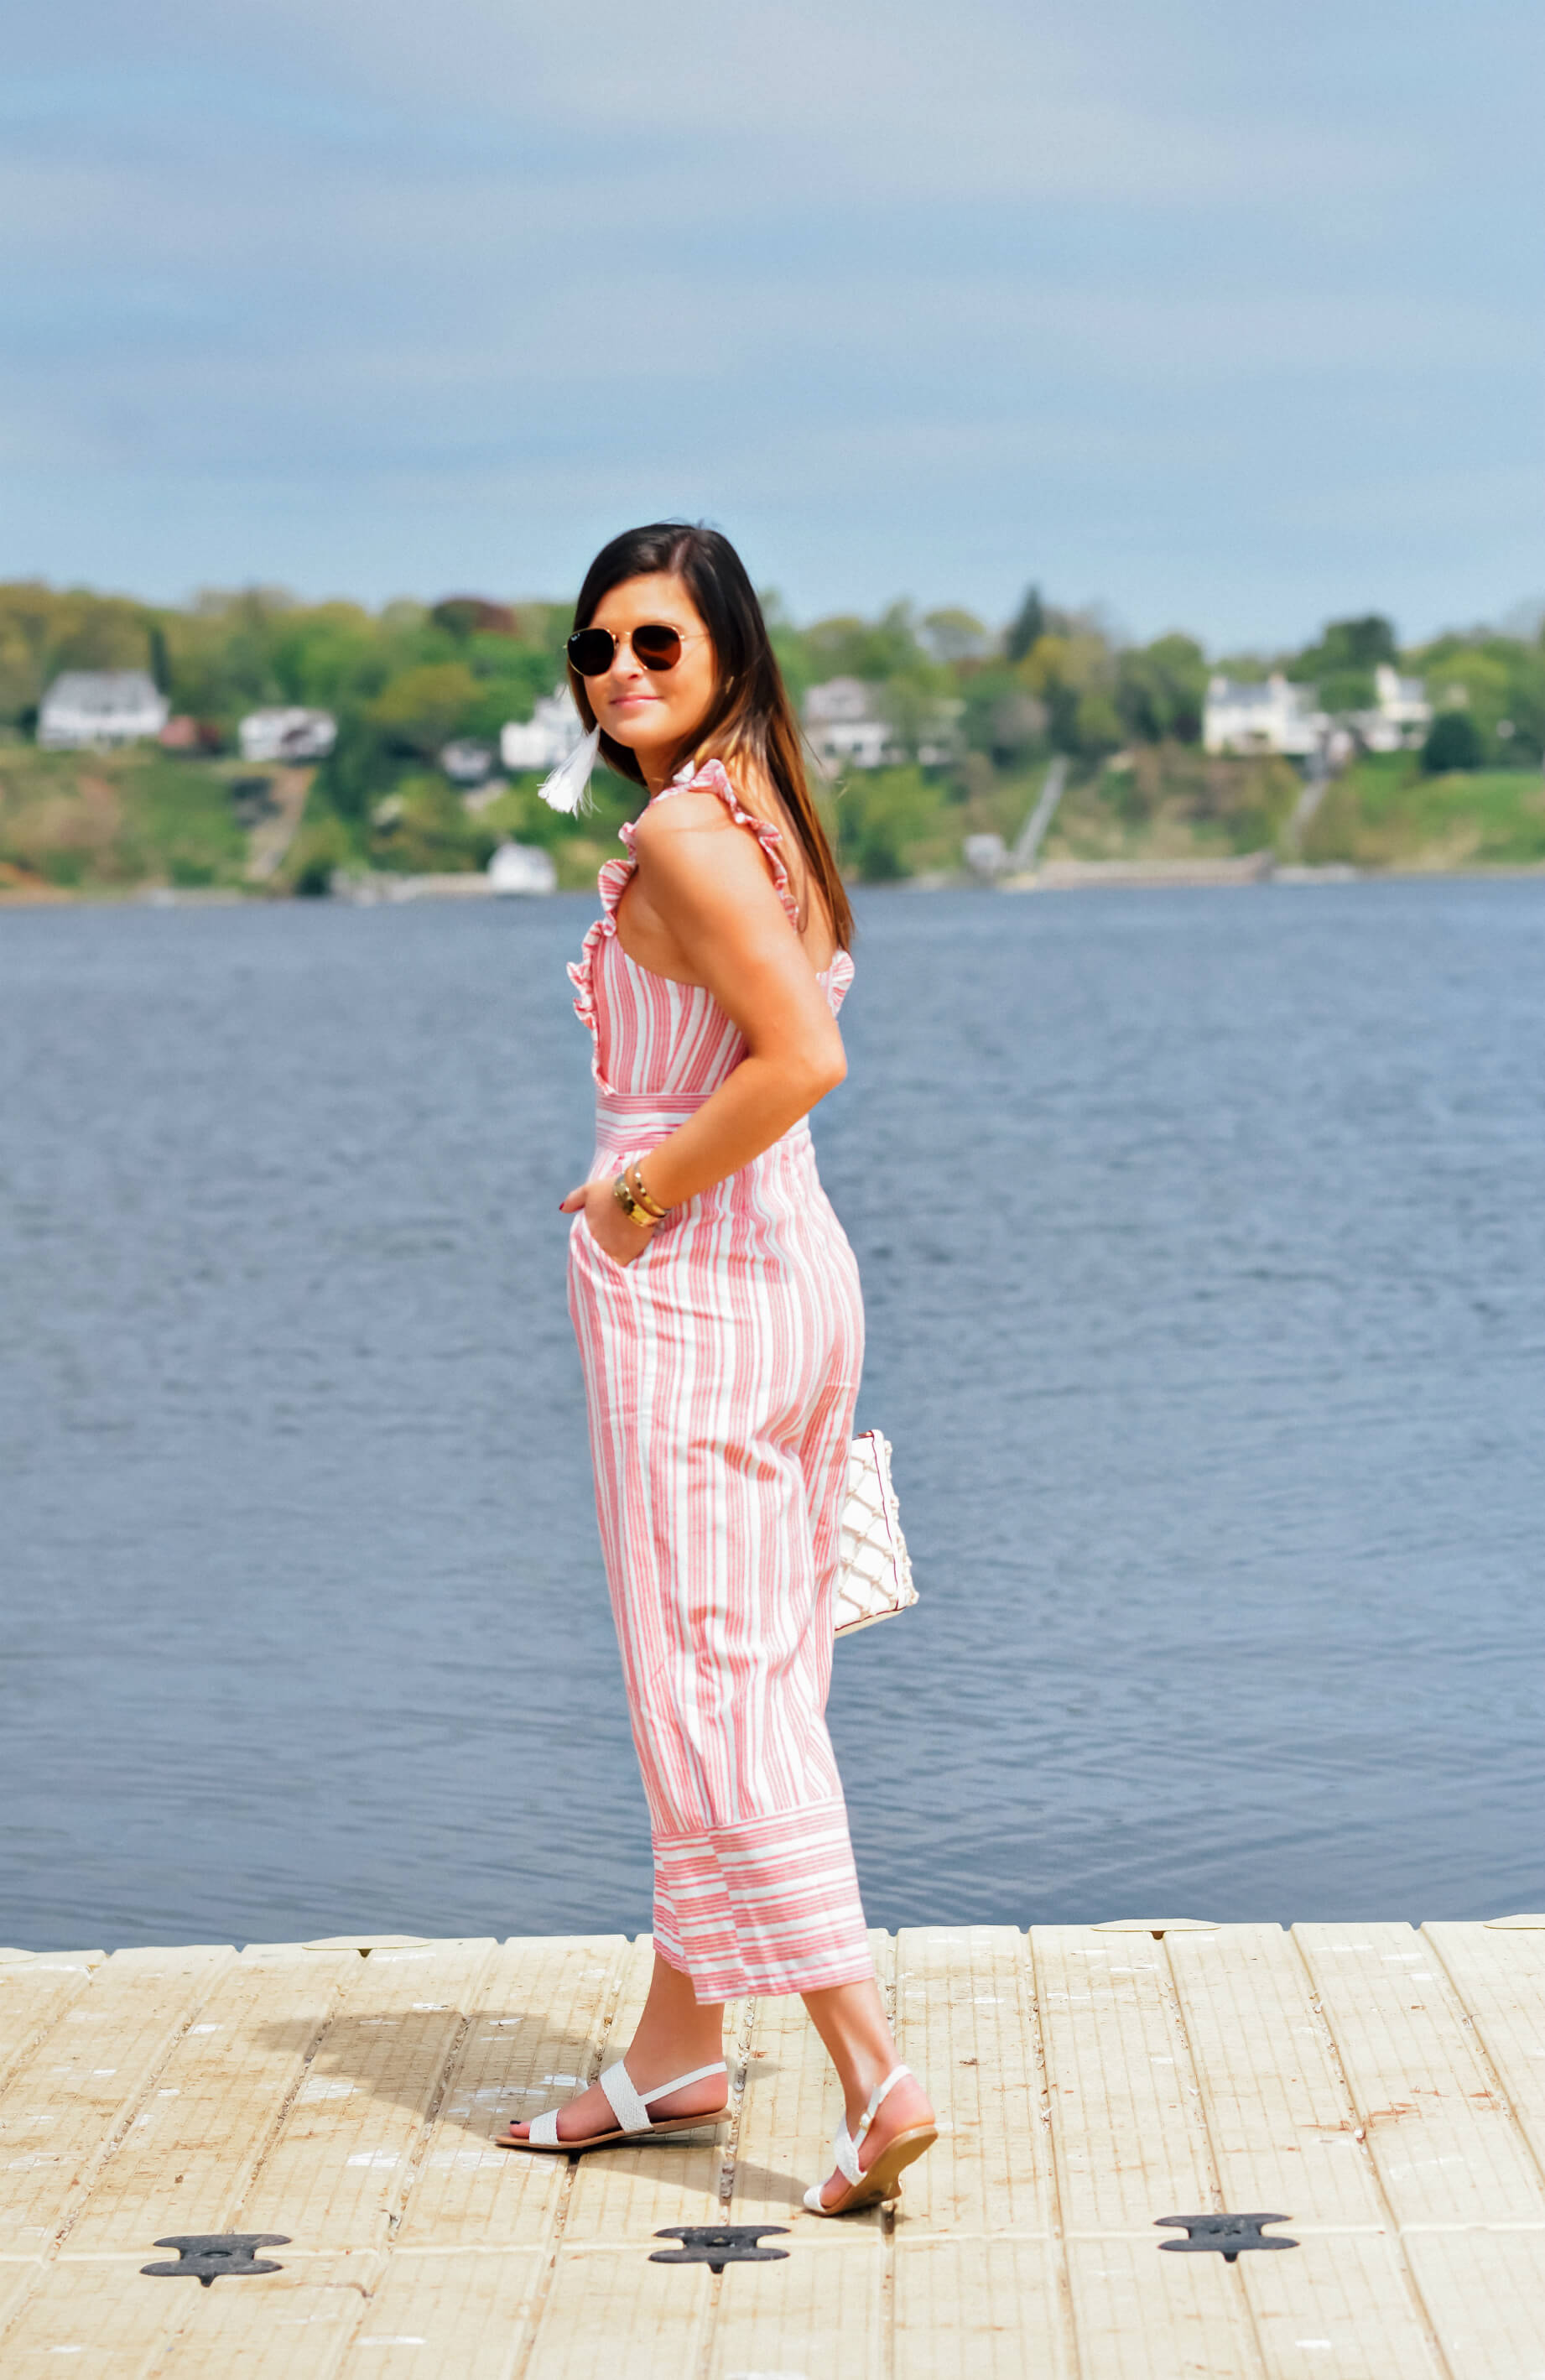 LULUS EMILIA RAE WHITE AND RED STRIPED RUFFLE CULOTTE JUMPSUIT, LULUS BLAISE WHITE FLAT SANDALS, LULUS MELLOW MOOD WHITE NET TOTE, LULUS STAY RAD WHITE WOVEN RATTAN TASSEL EARRINGS, Memorial Day Outfit Idea, Memorial Day Style, Tilden of To Be Bright